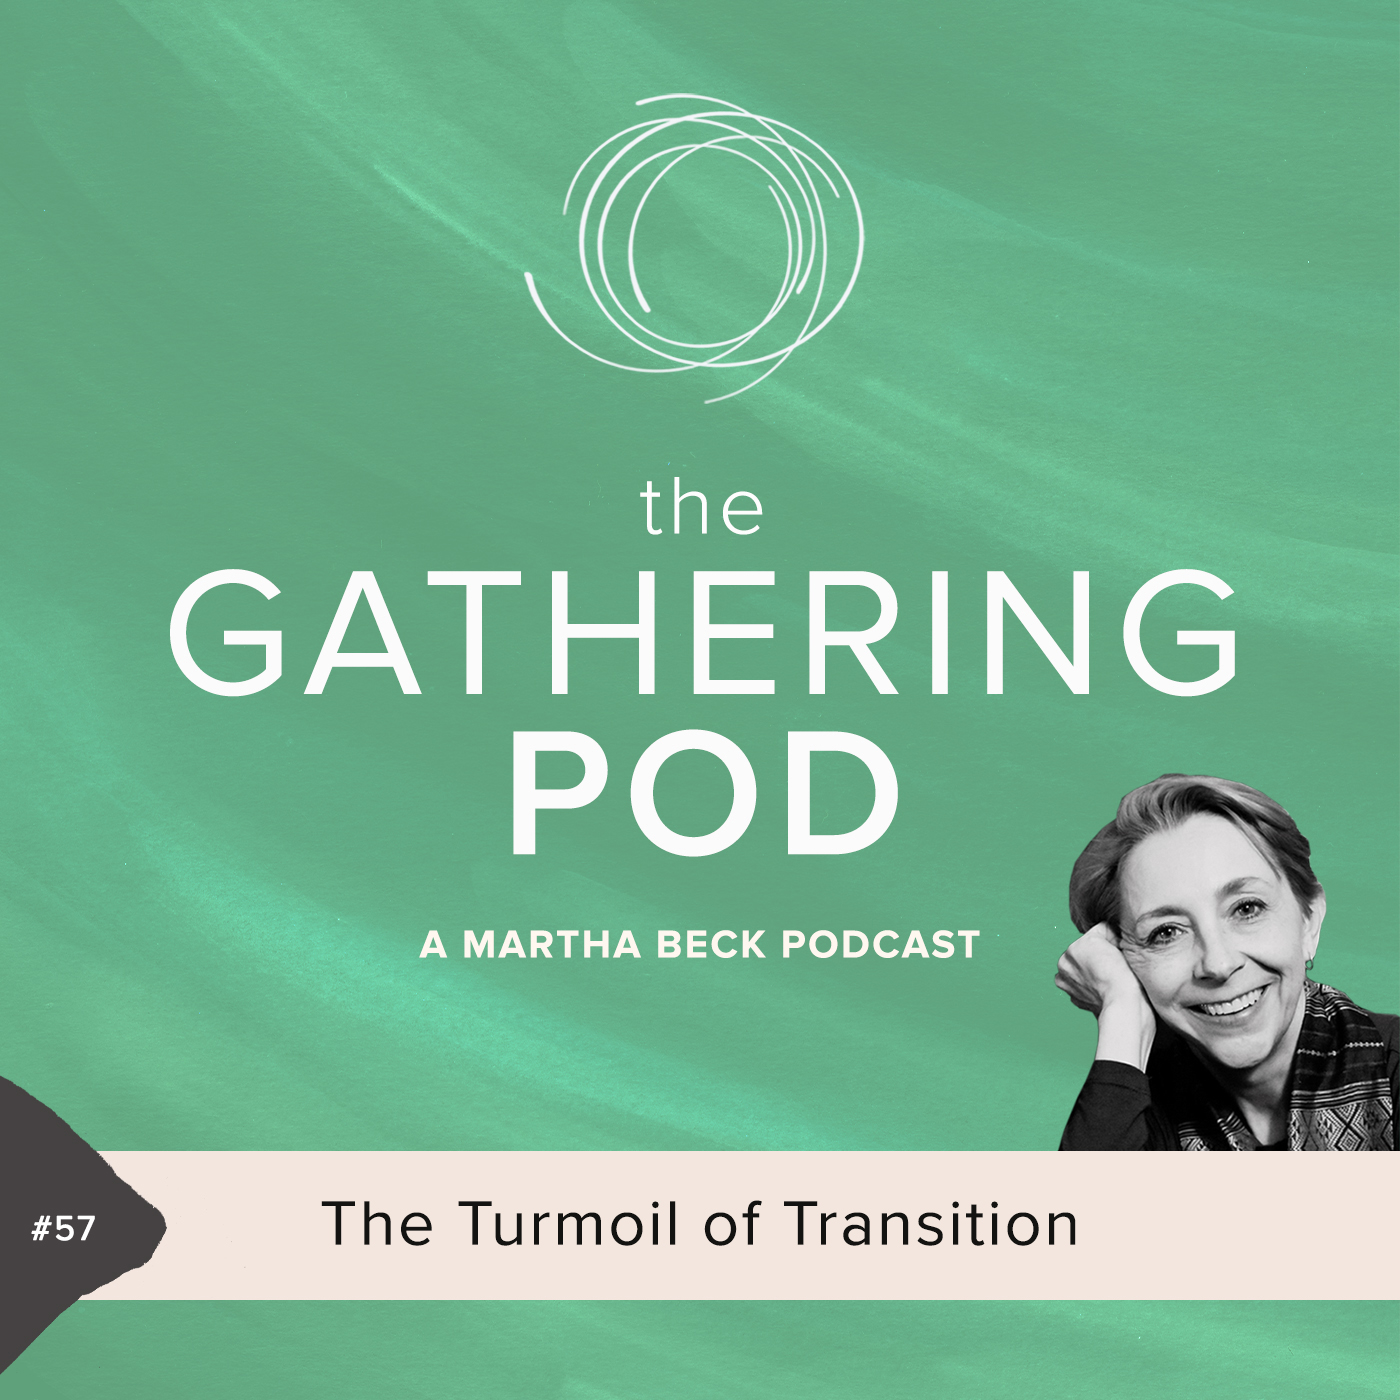 Image for The Gathering Pod A Martha Beck Podcast Episode #57 The Turmoil of Transition